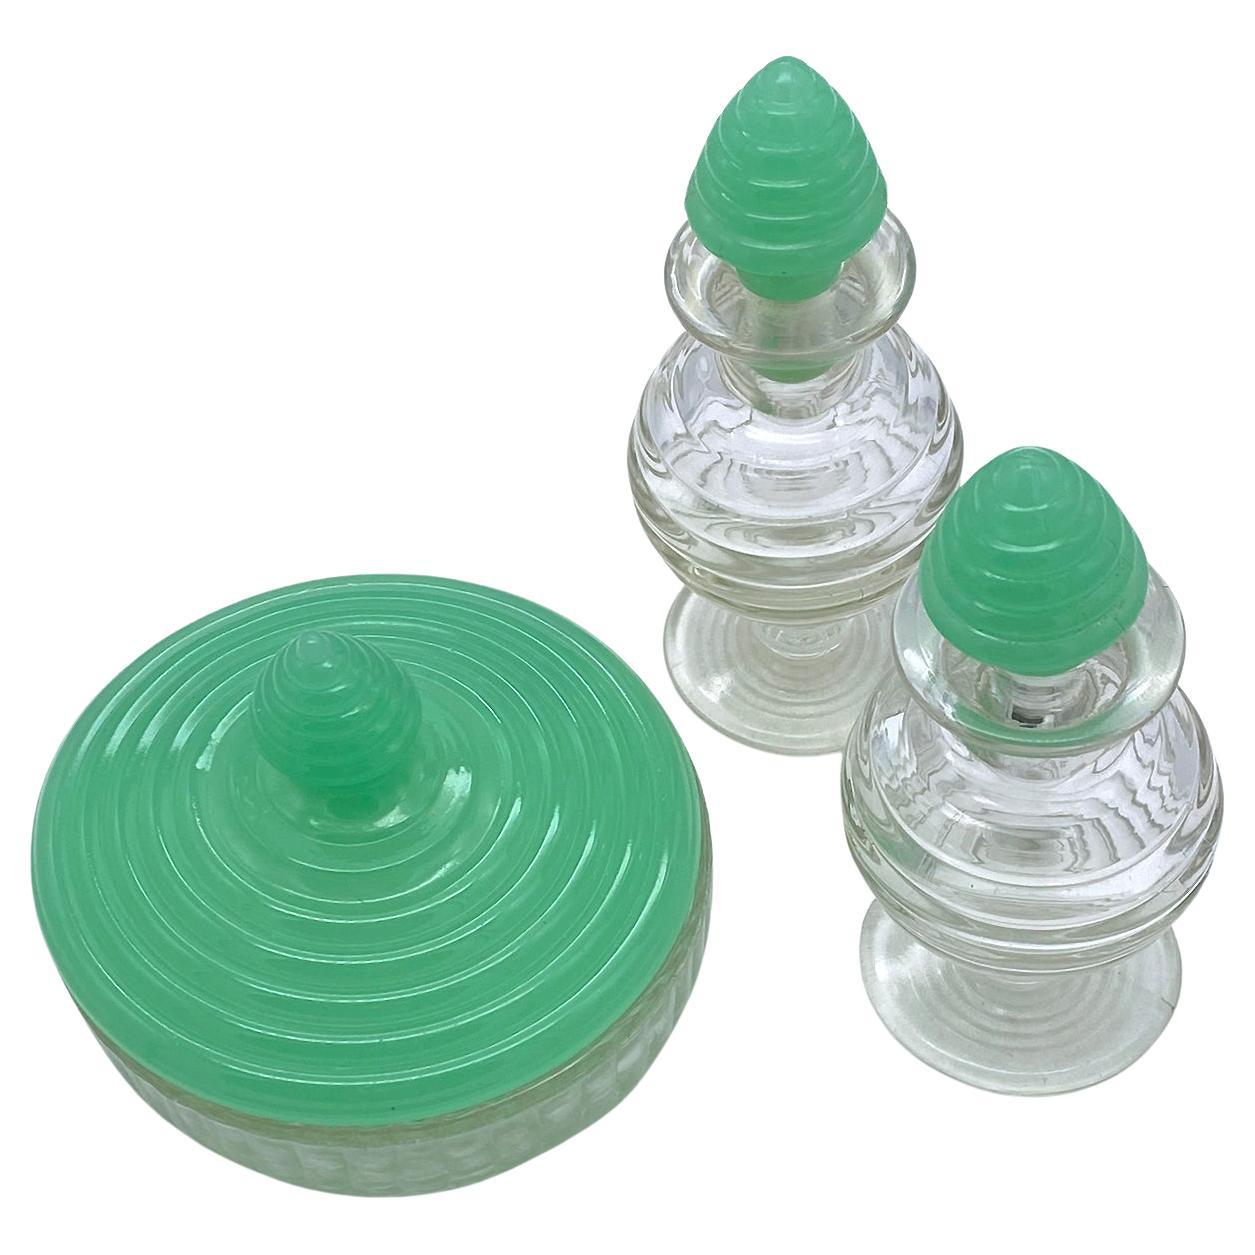 This is a Mid Century Modern pressed glass vanity set. The set includes two perfume bottles and one powder box. These three clear optical pressed glass dresser decorative pieces come with Kelly Green stopper/lids. The perfect touch for your vintage